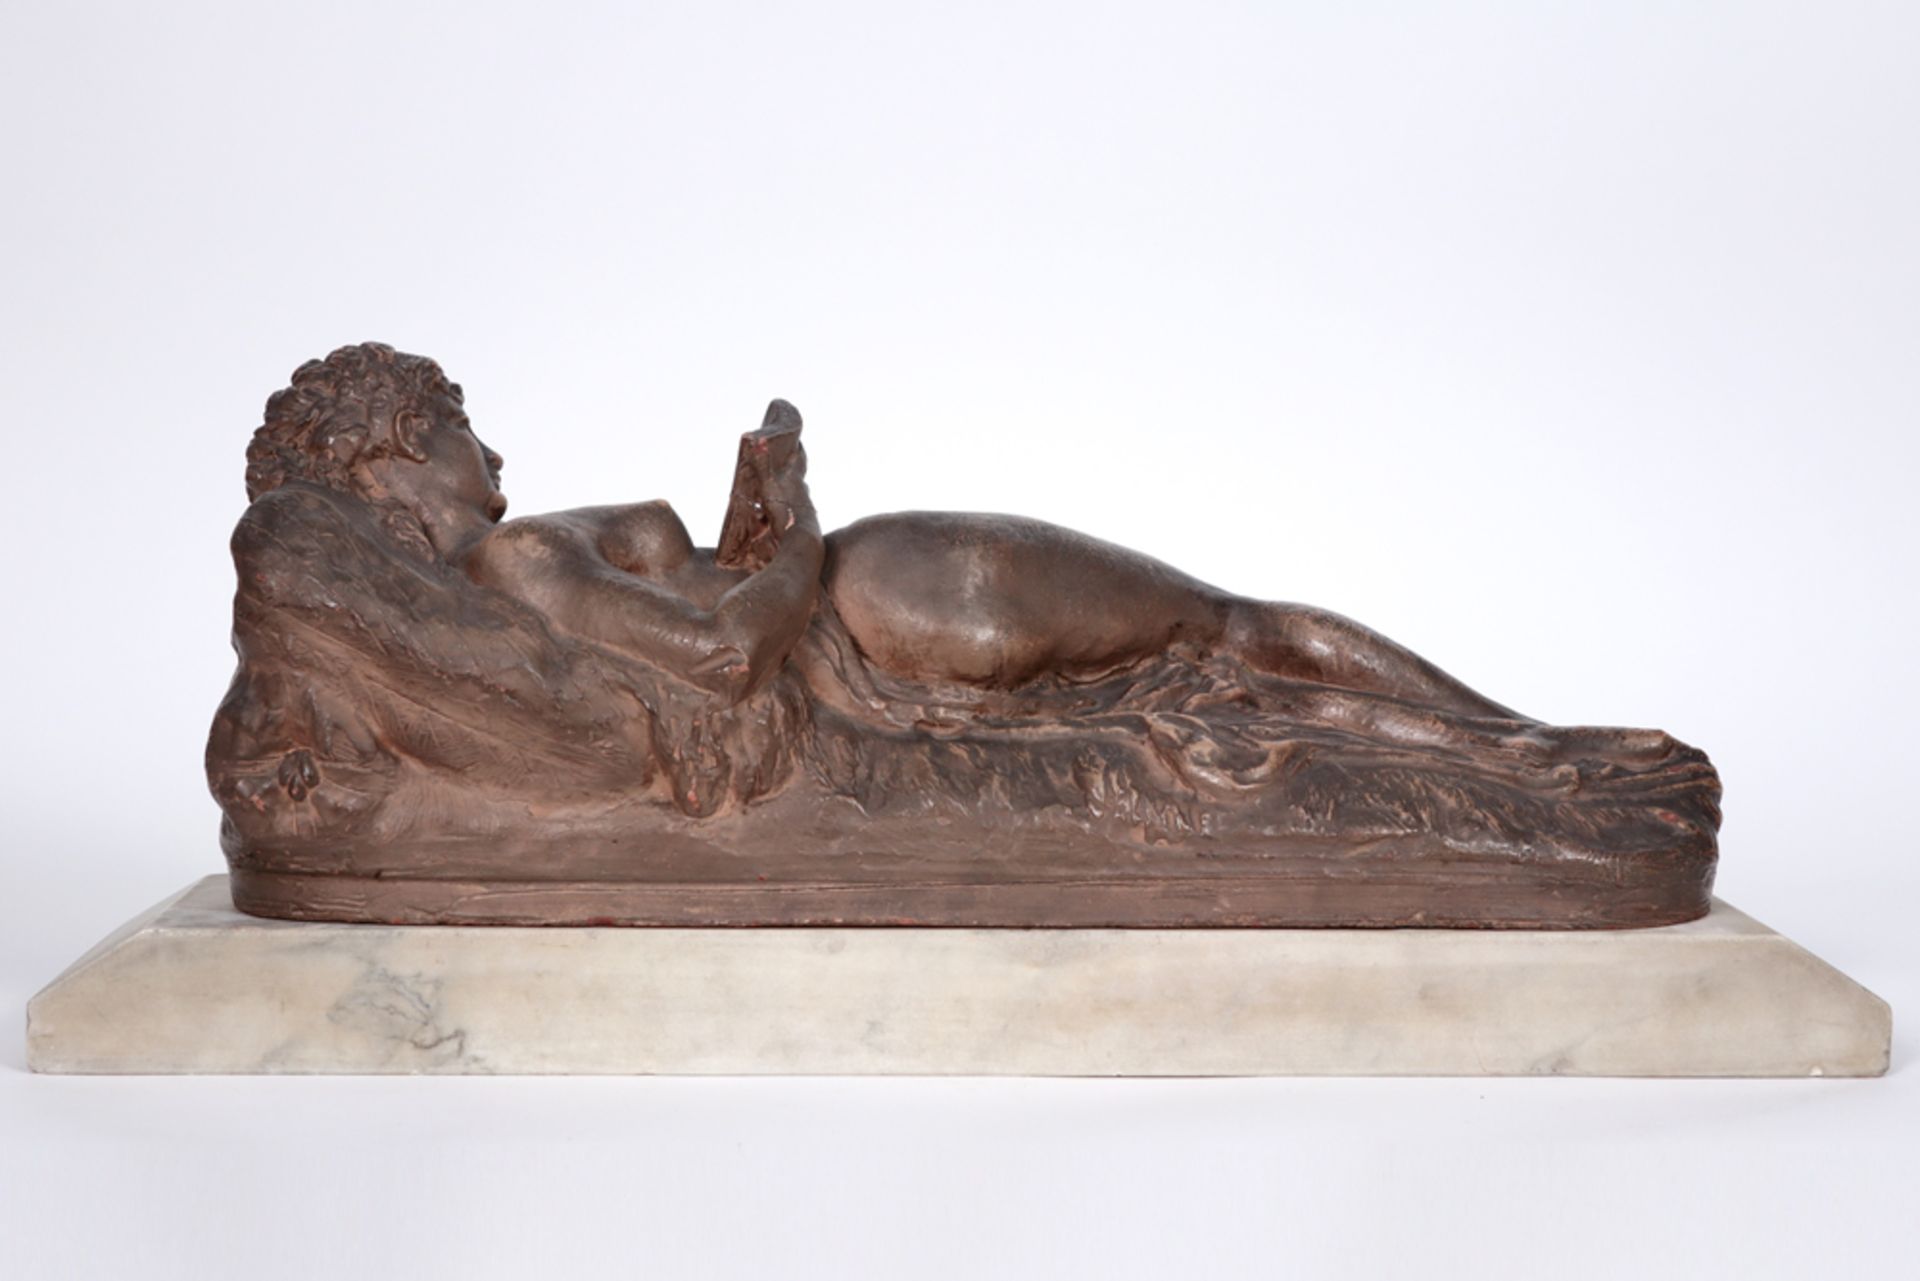 19th Cent. Belgian sculpture in earthenware on a marble base - signed Charles P. Van der - Image 3 of 4